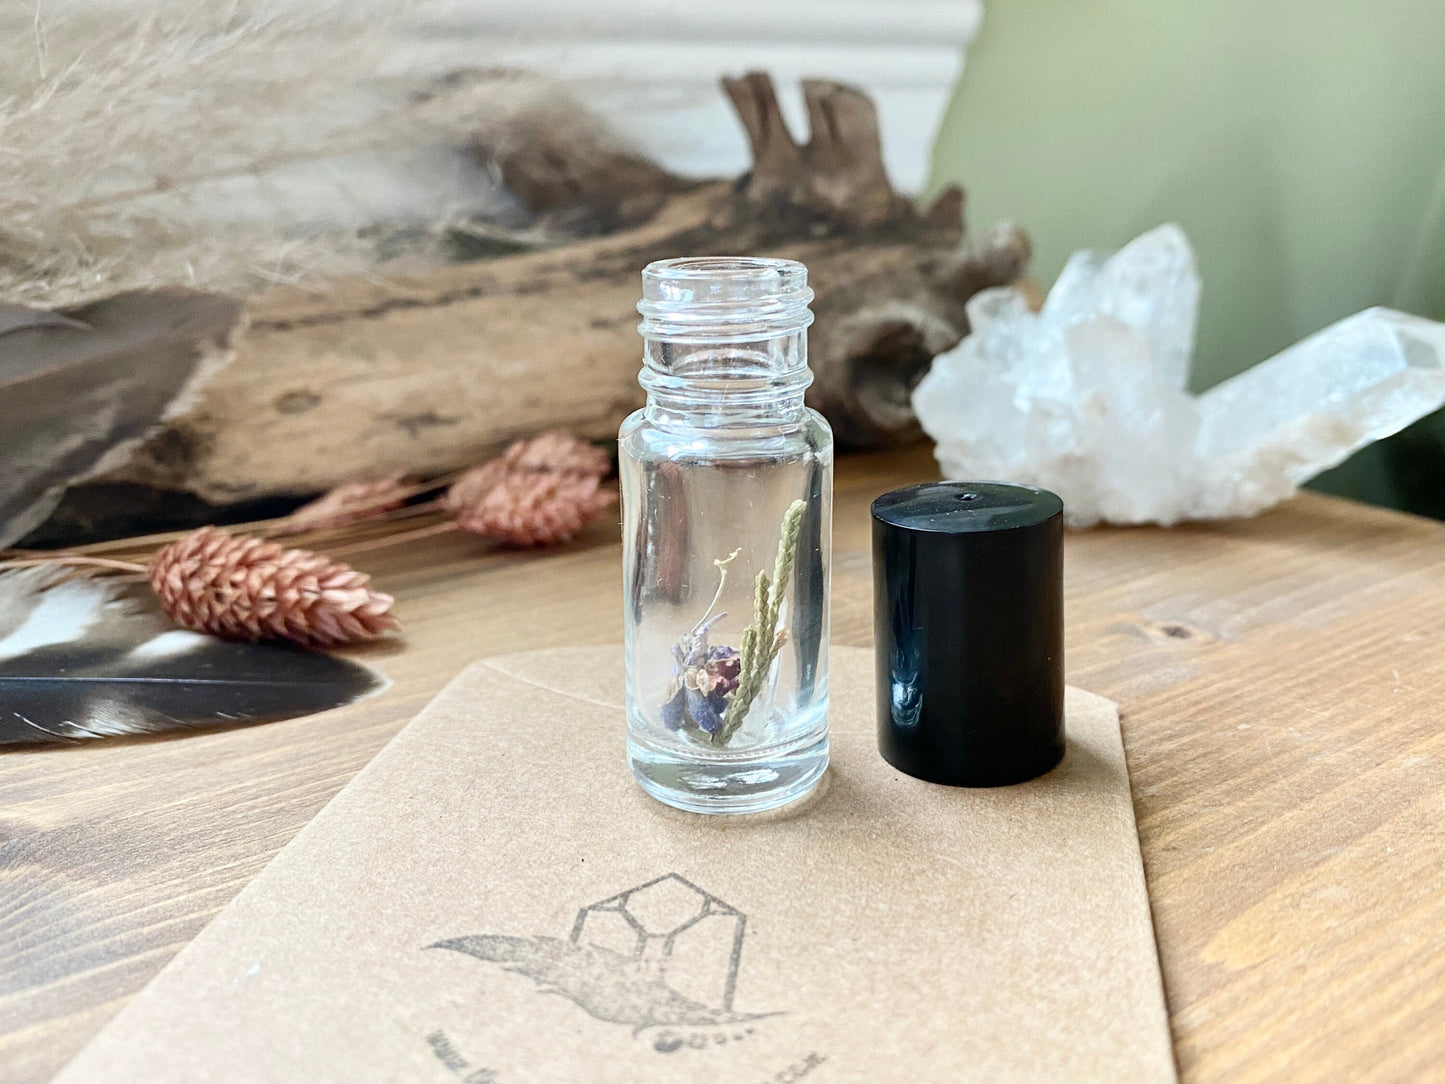 DIY: Aromatherapy Oil - 5ml Glass Bottle with Green Aventurine Gemstone Roller and Lemon Grass Essential Oil with Crystal & Dried Flowers